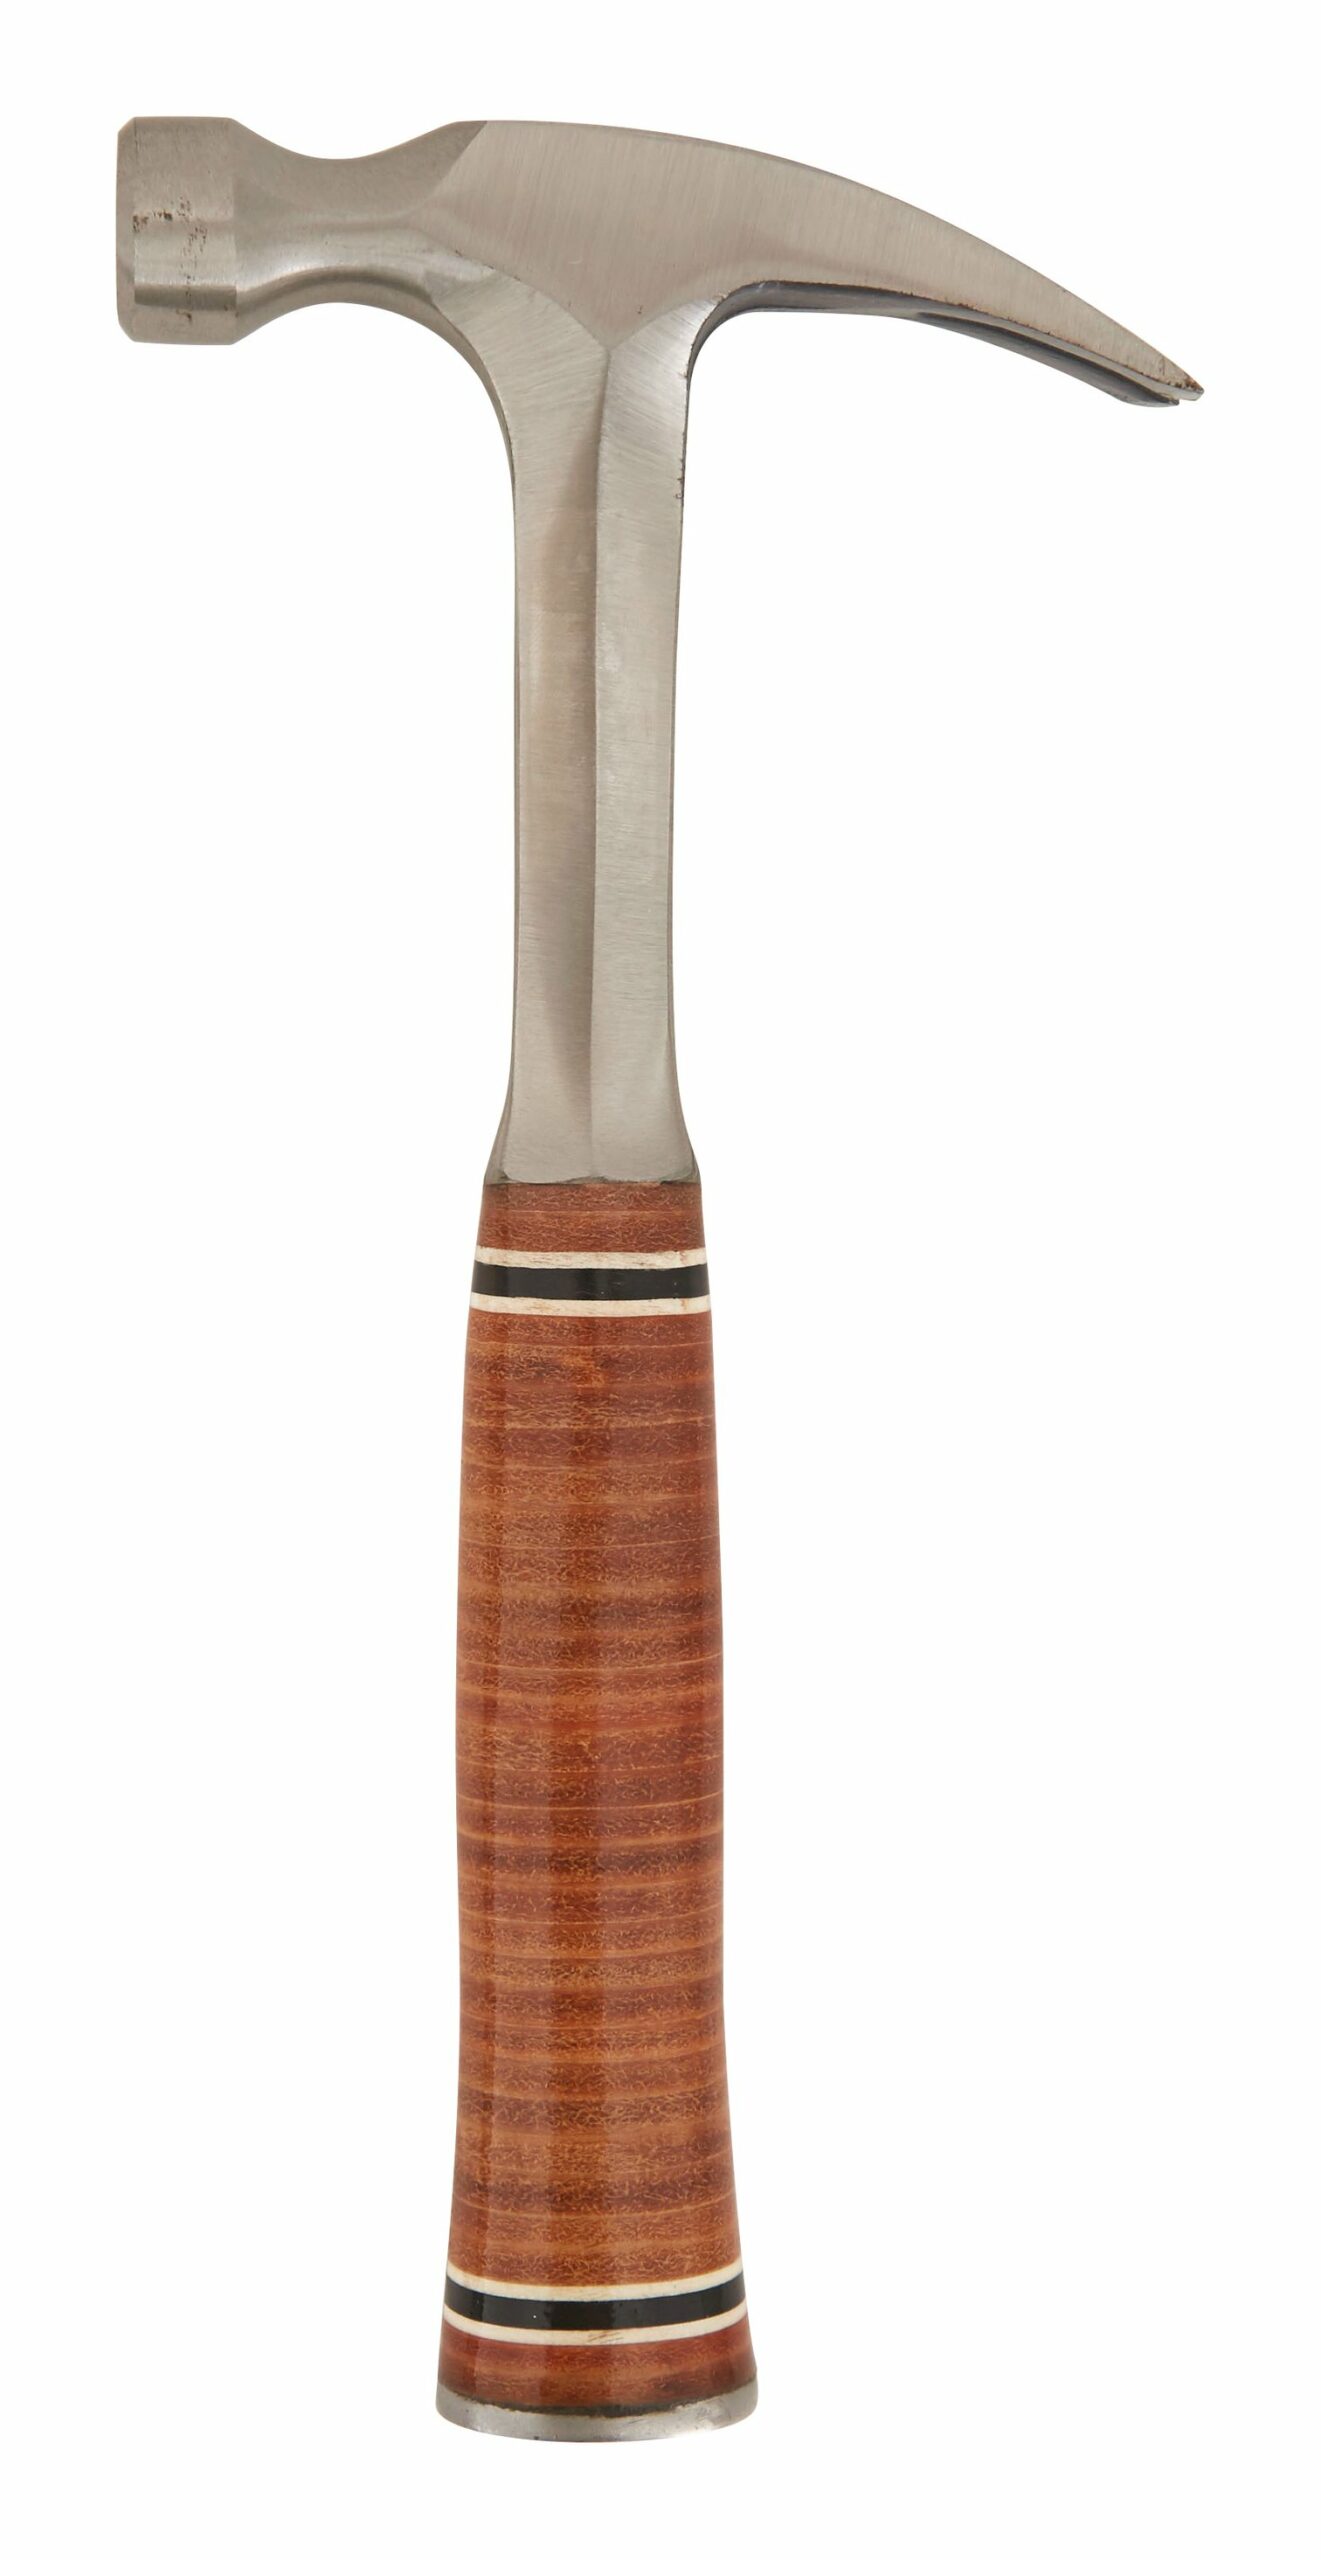 Picard 600gm (21oz) German Latthammer, smooth face, magnetic nailstart,  solid steel handle with stacked leather grip